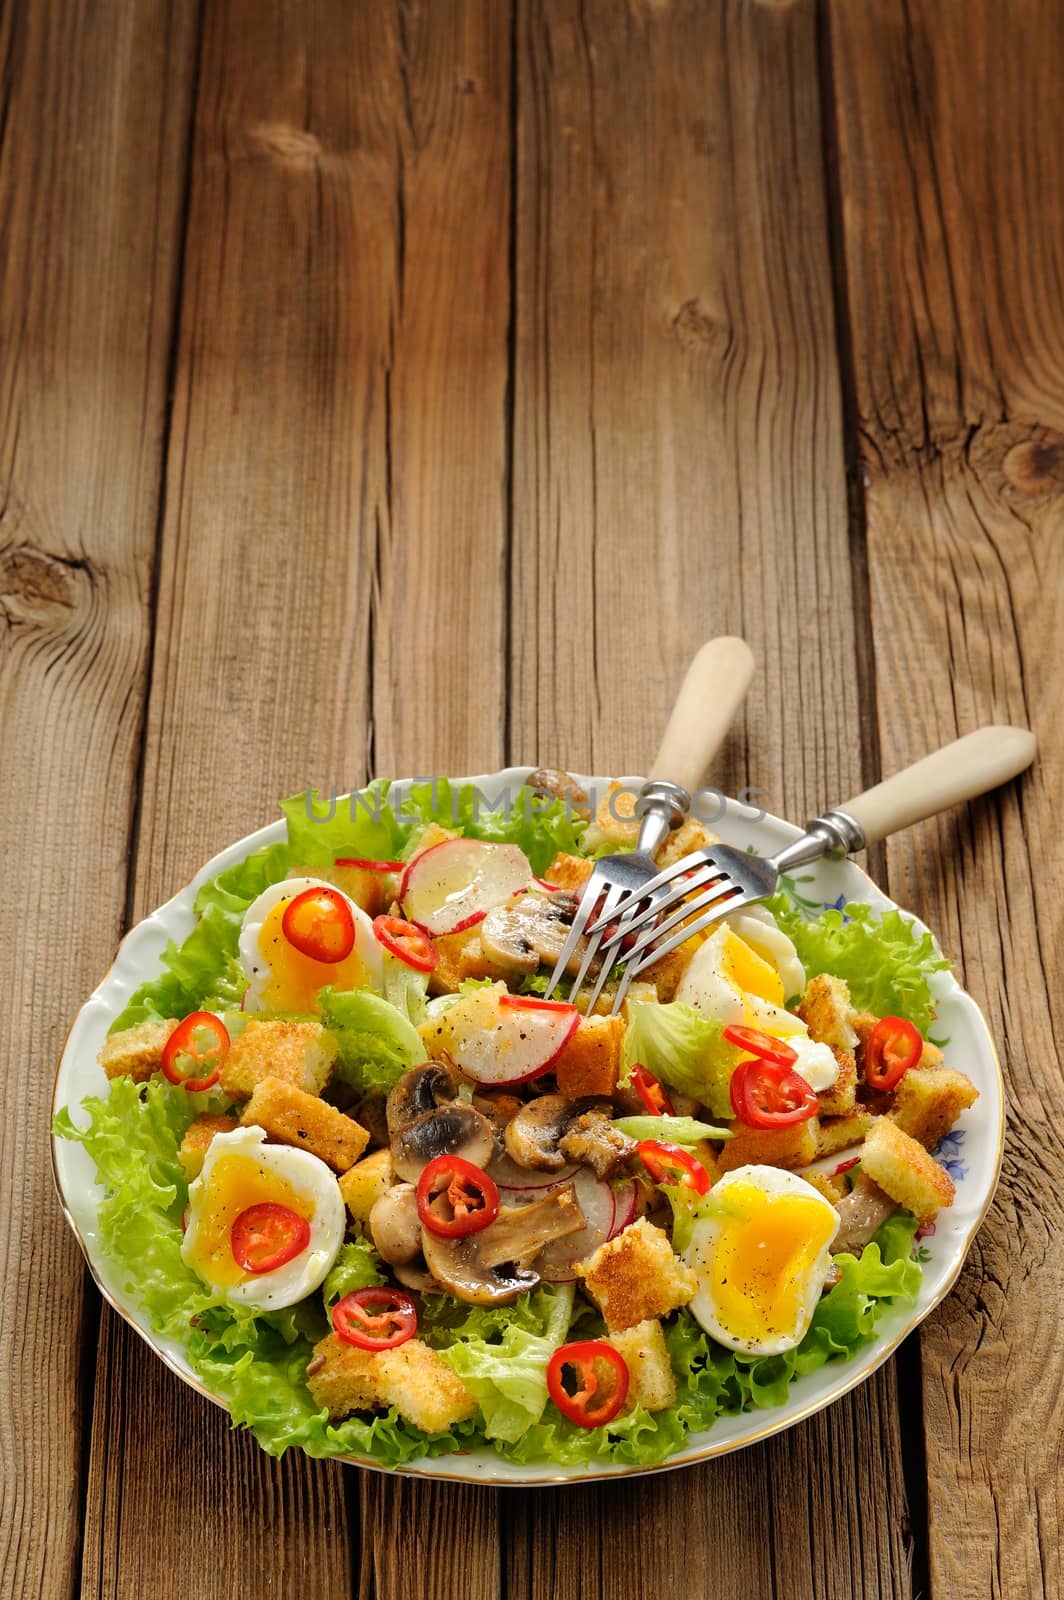 Salad Caesar with mushrooms, eggs, chili and radish with two forks on wooden background with space vertical